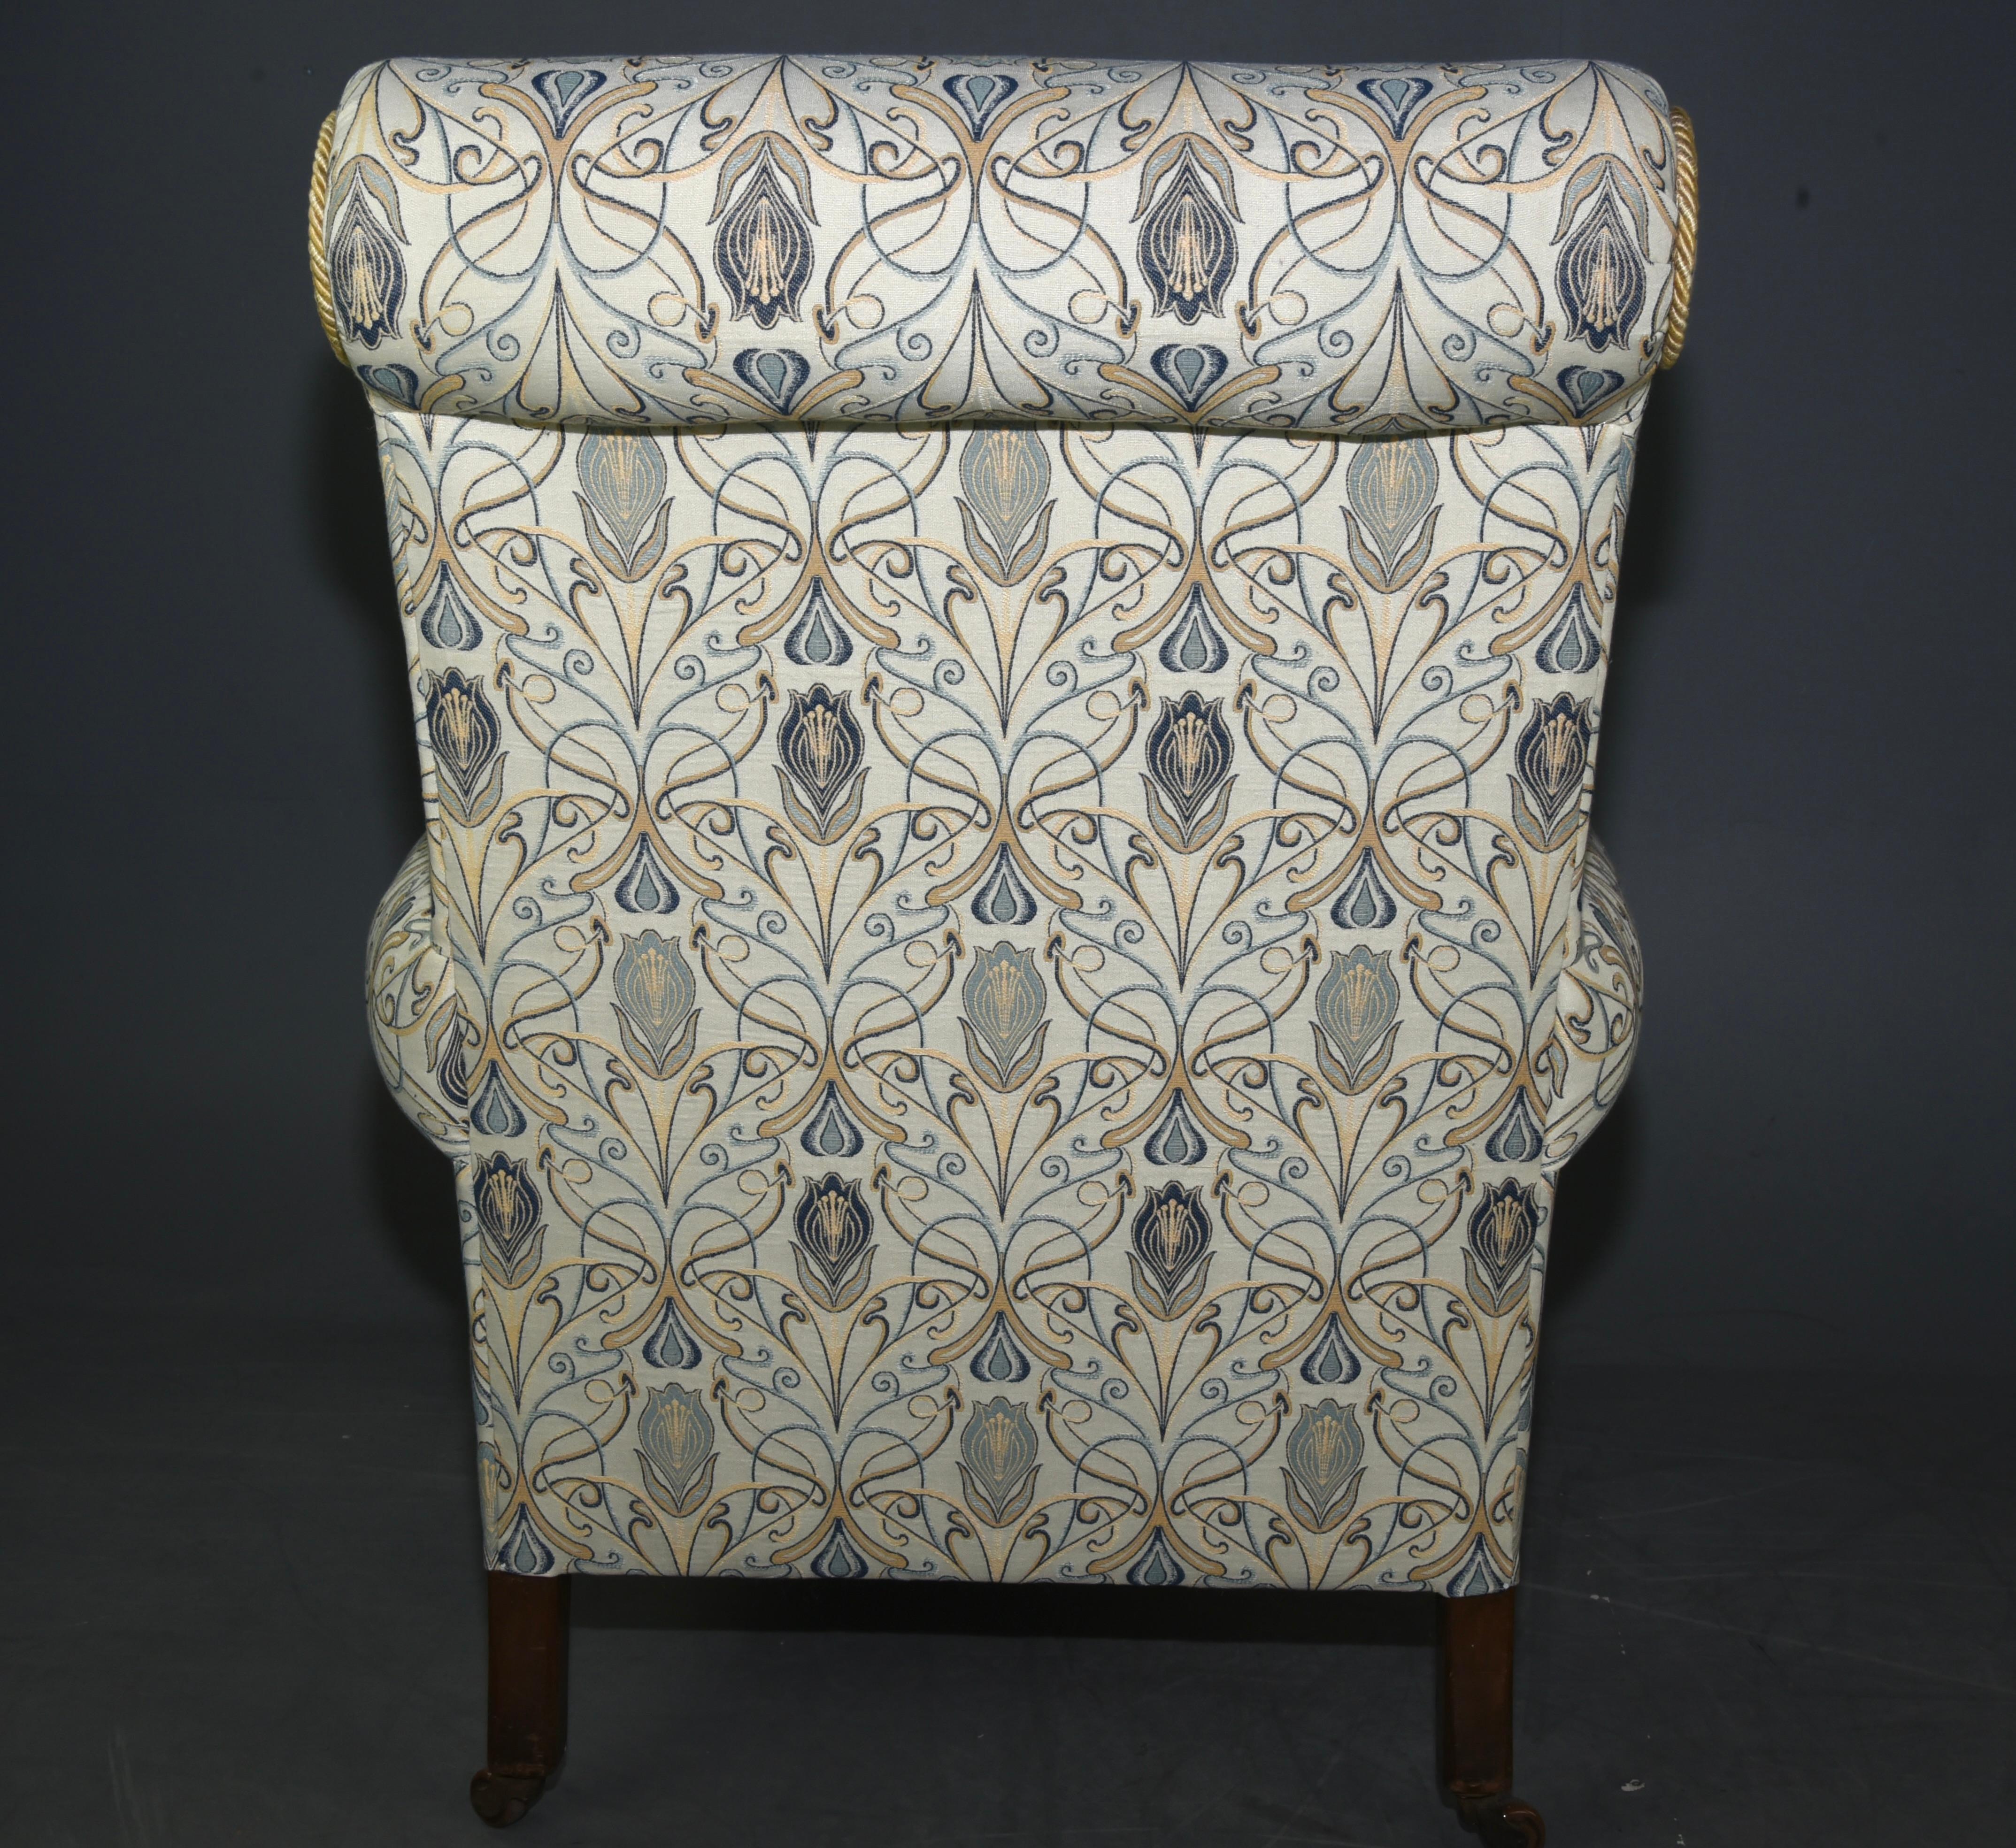 Late 19th Century English Victorian Upholstered Arm Chair